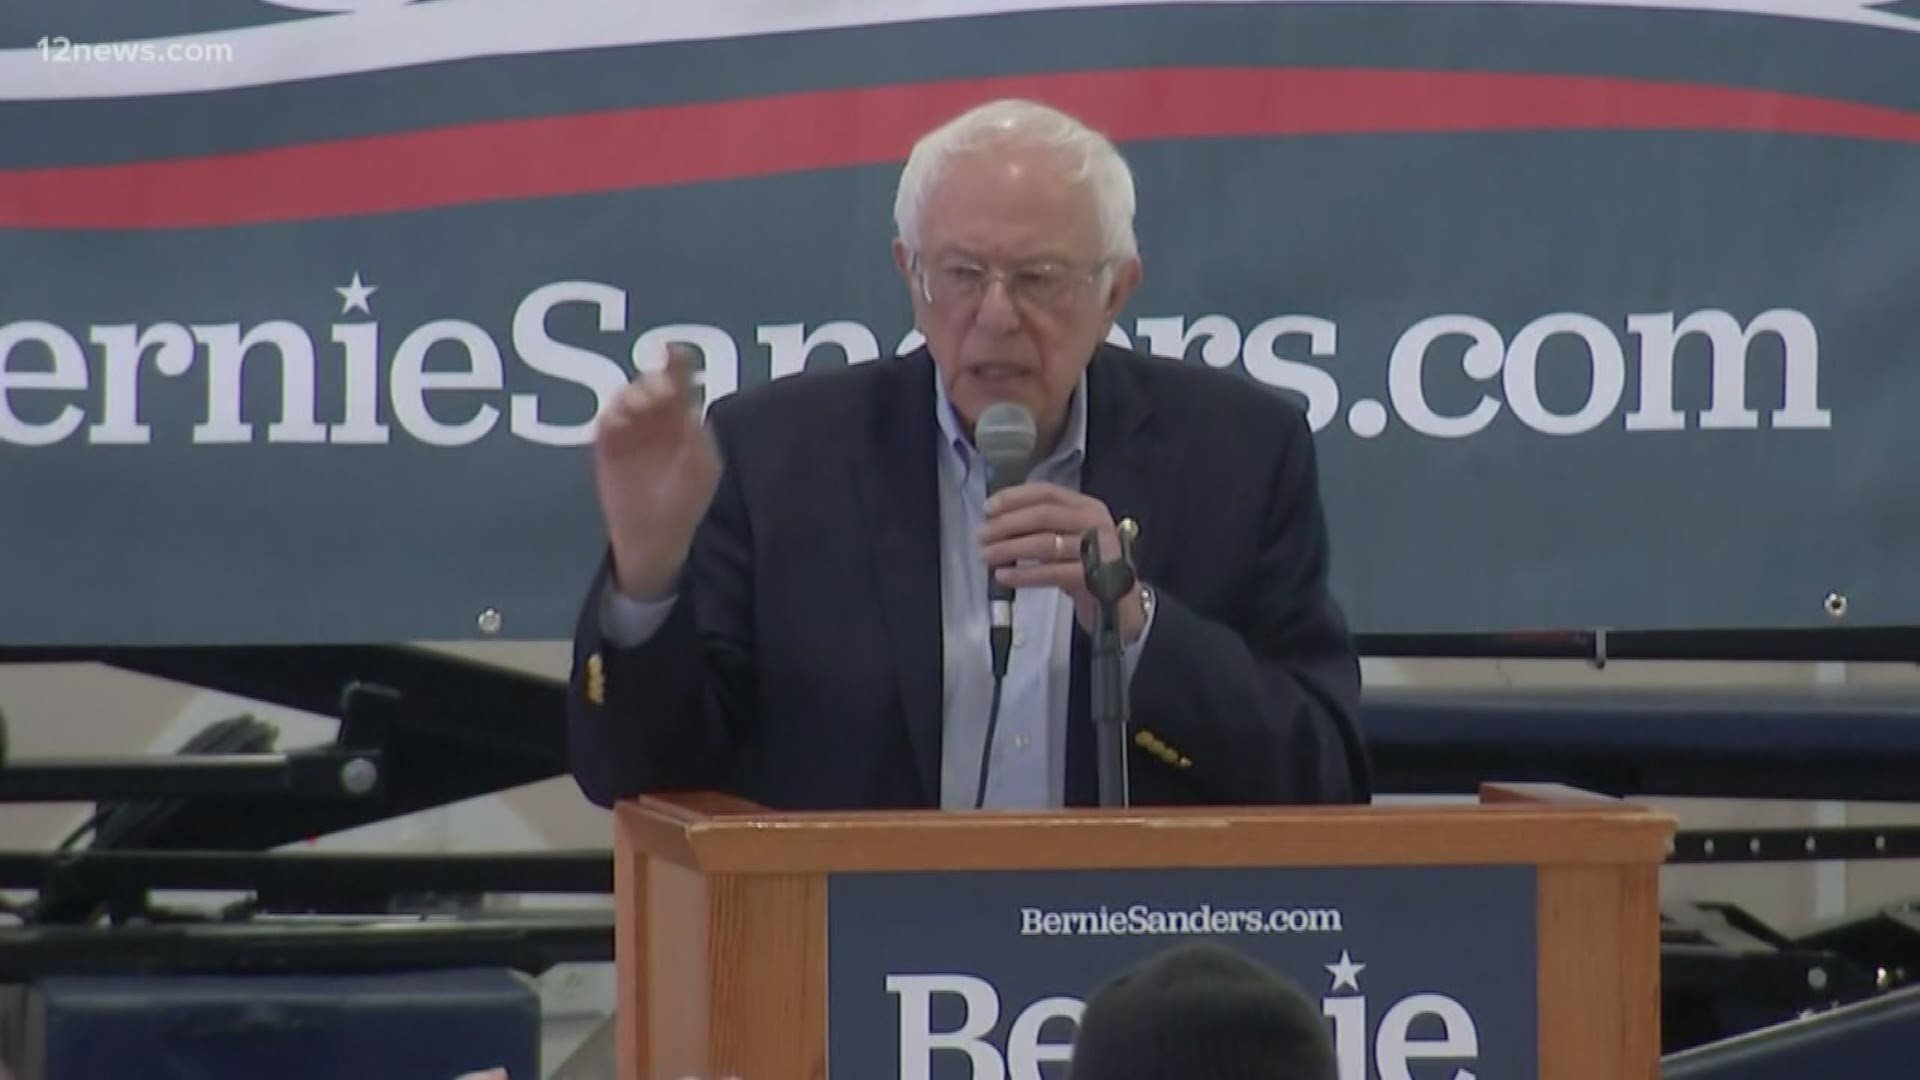 Democratic frontrunner Bernie Sanders is in the Valley to fire up his base. The senator from Vermont is holding his rally at Veterans Memorial Coliseum in Phoenix.